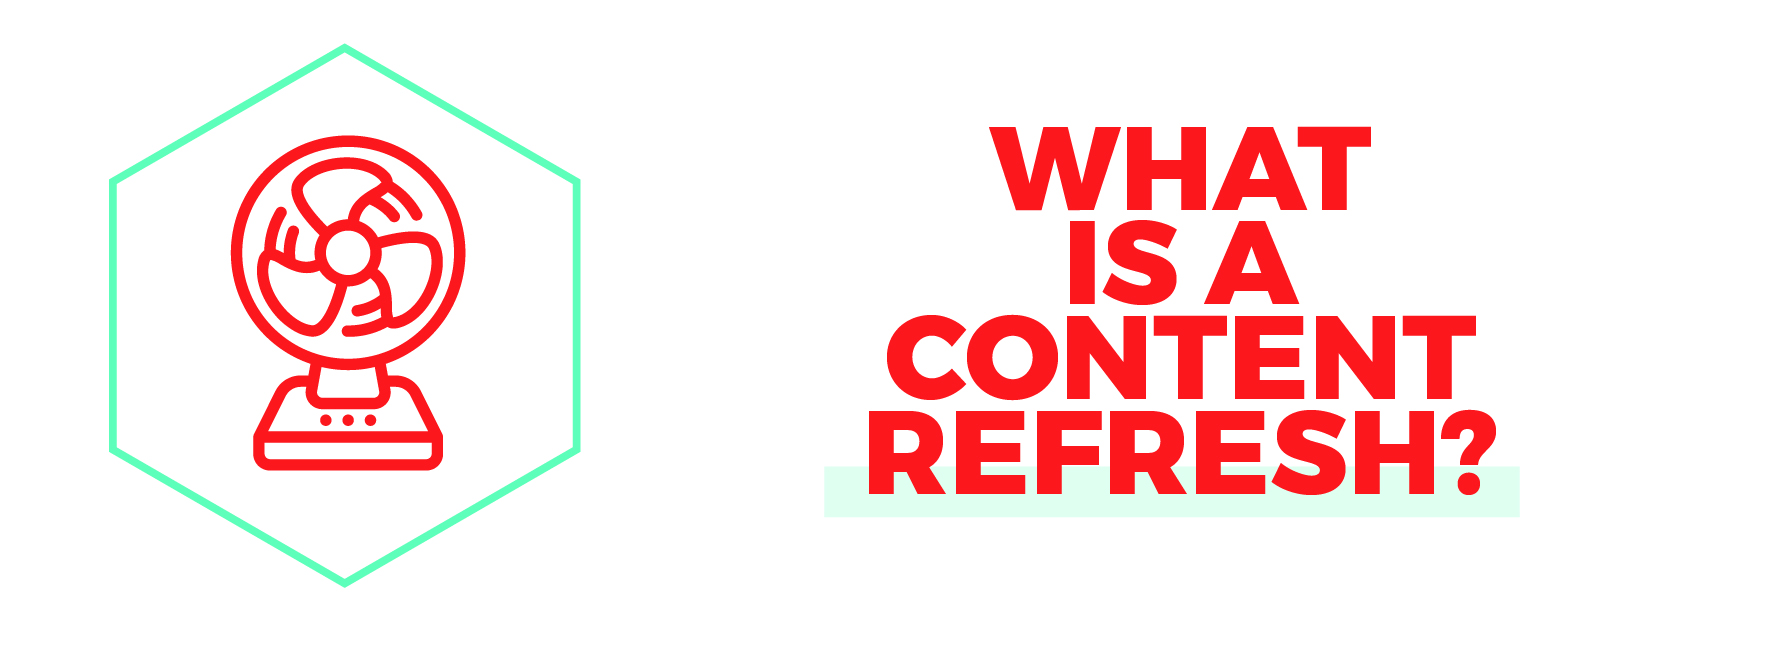 What is a content refresh